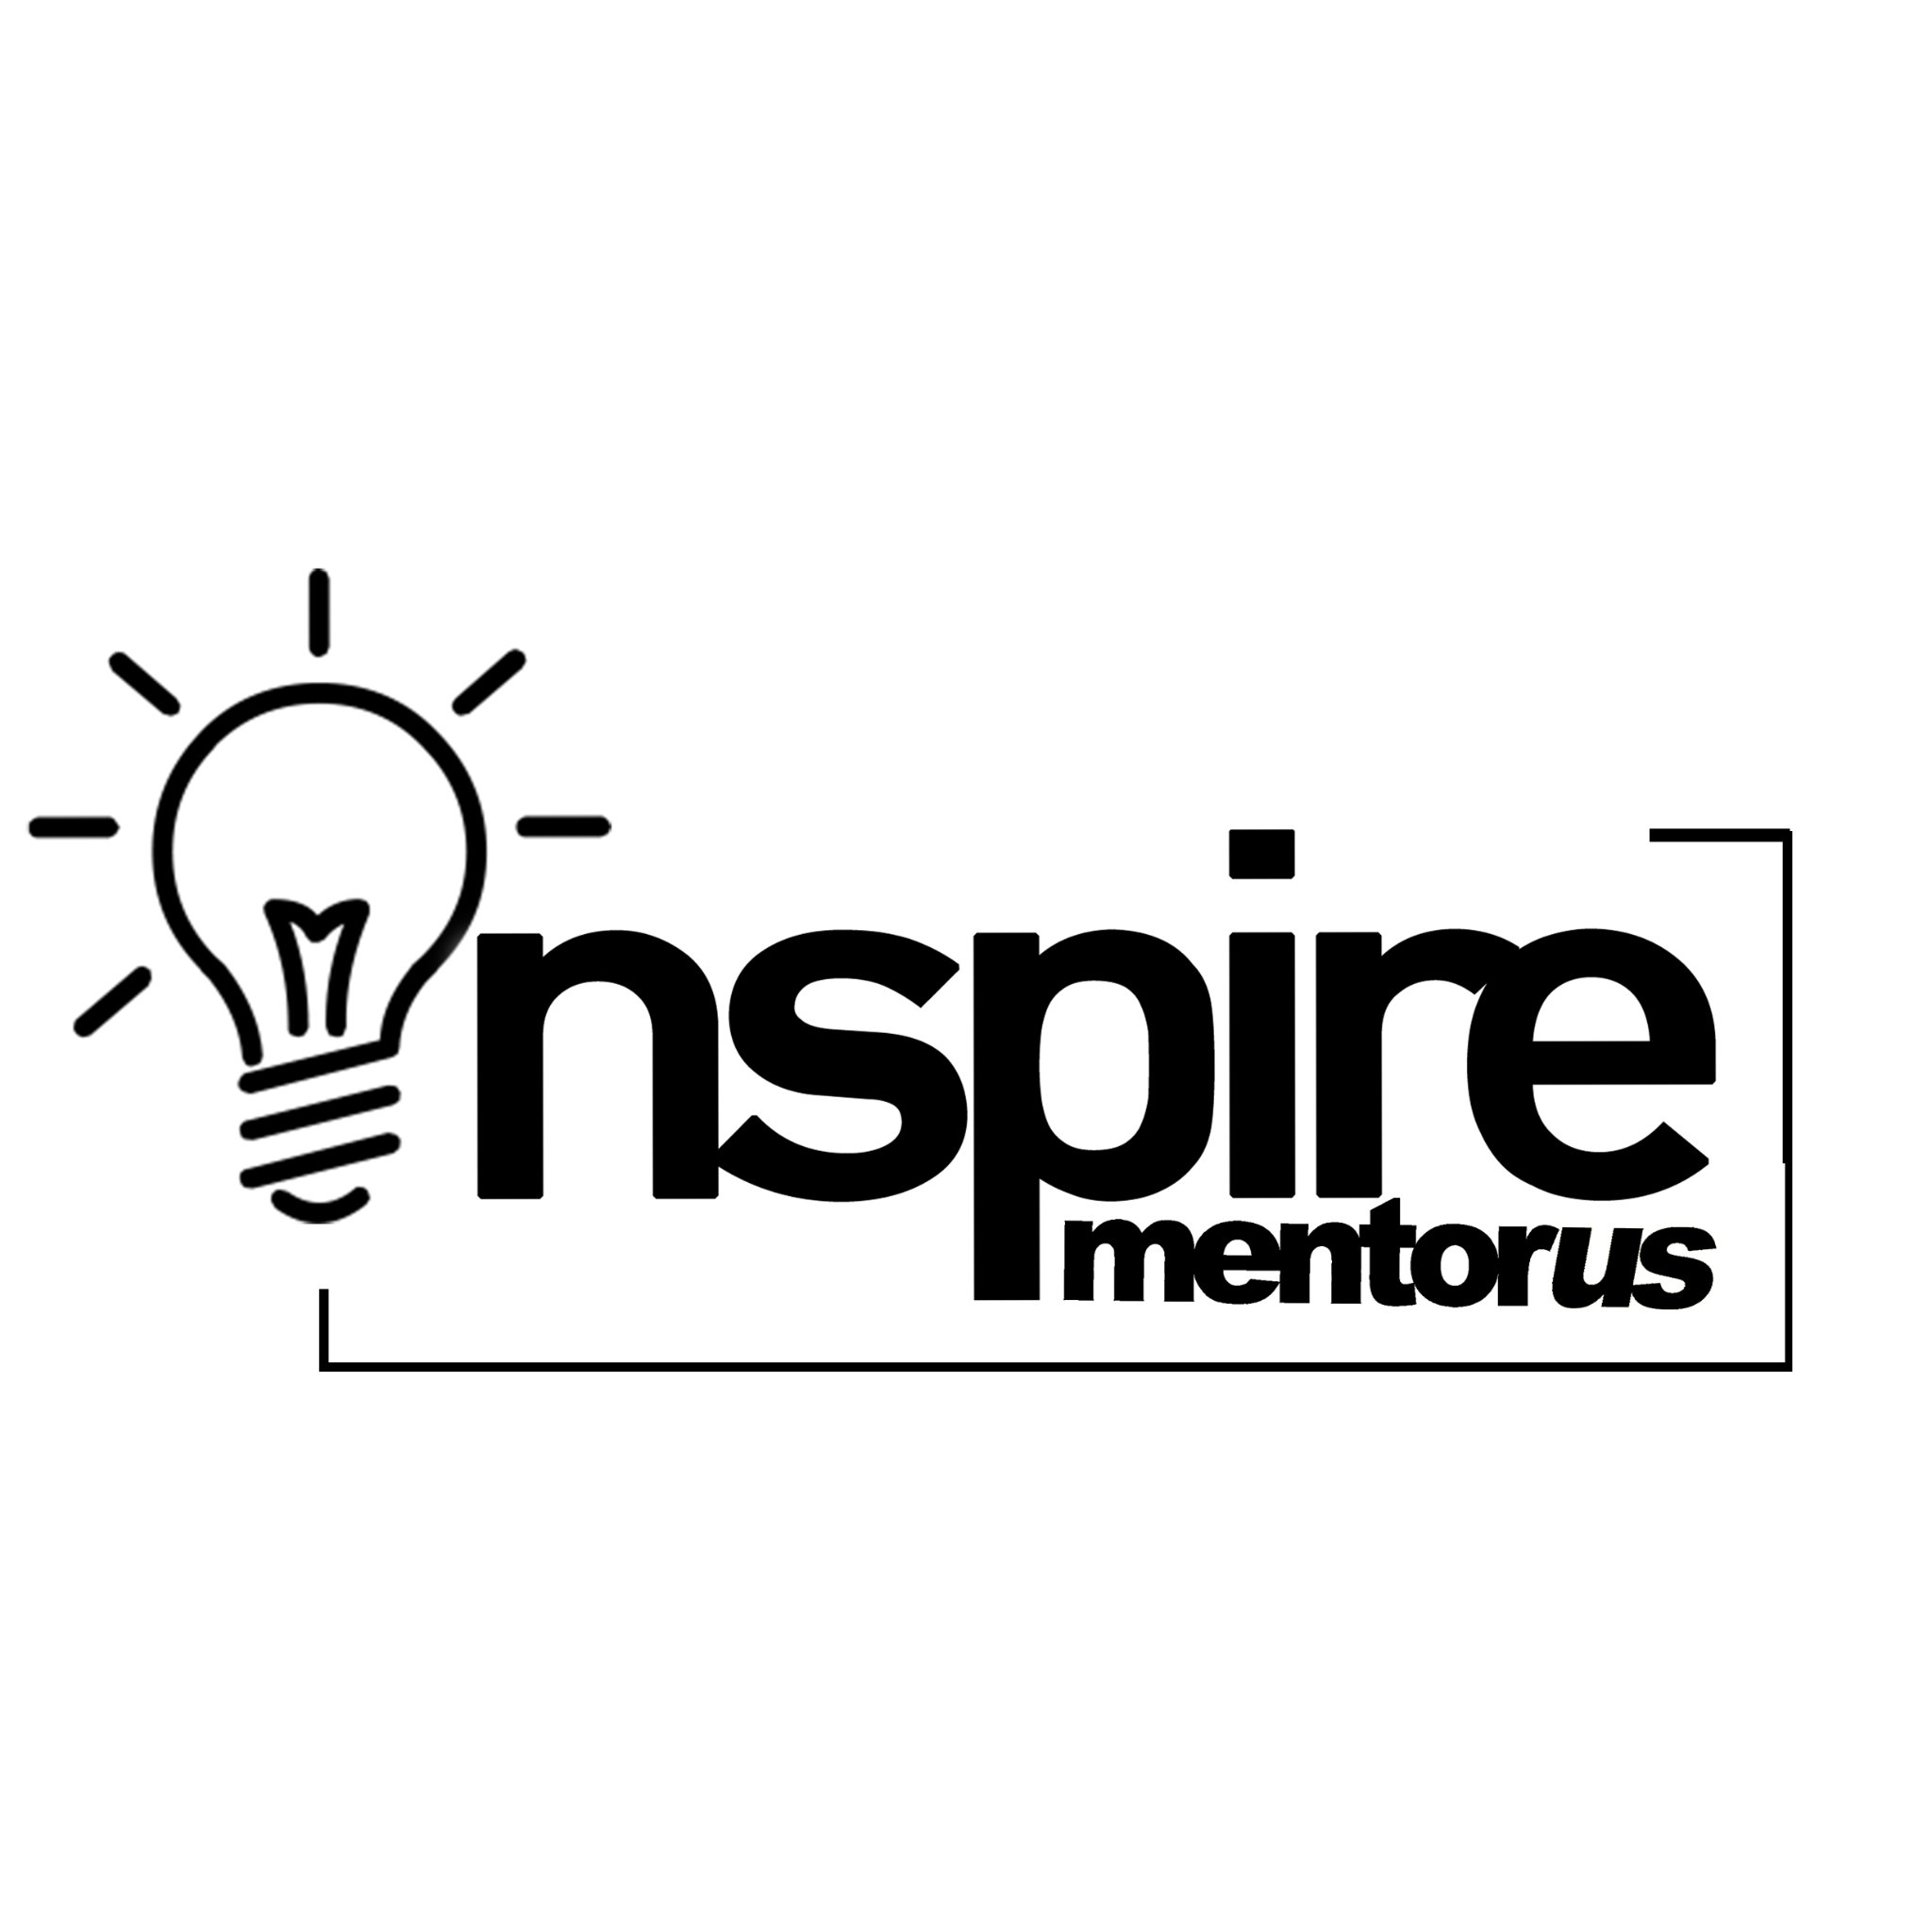 MentorUsLive is a platform that explores the mindsets of the Africa's highest achievers to learn their secrets to success. Hosted by founder Pedzi Chimbwanda